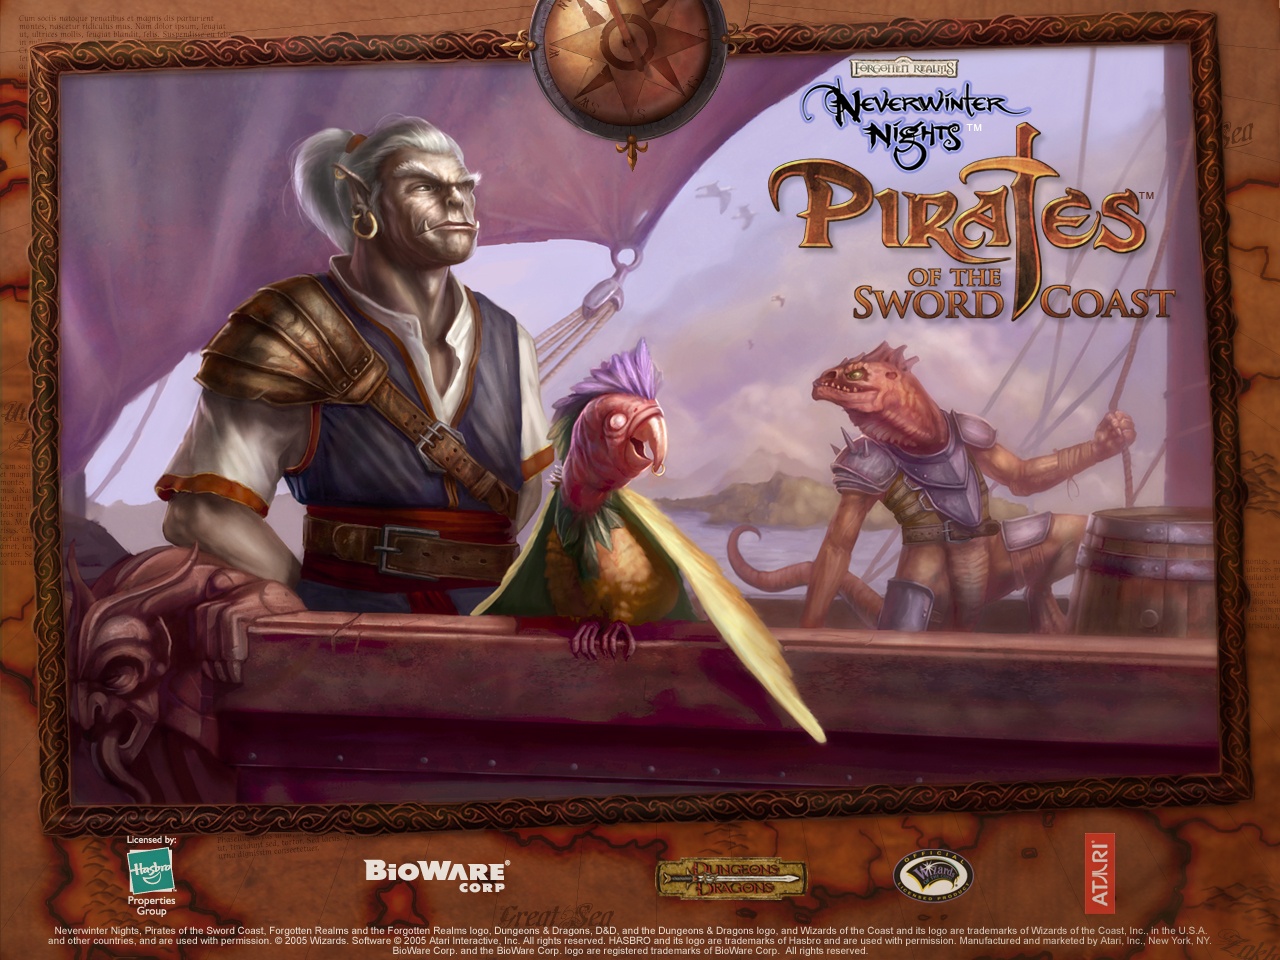 video game, neverwinter nights: pirates of the sword coast, pirate, neverwinter nights